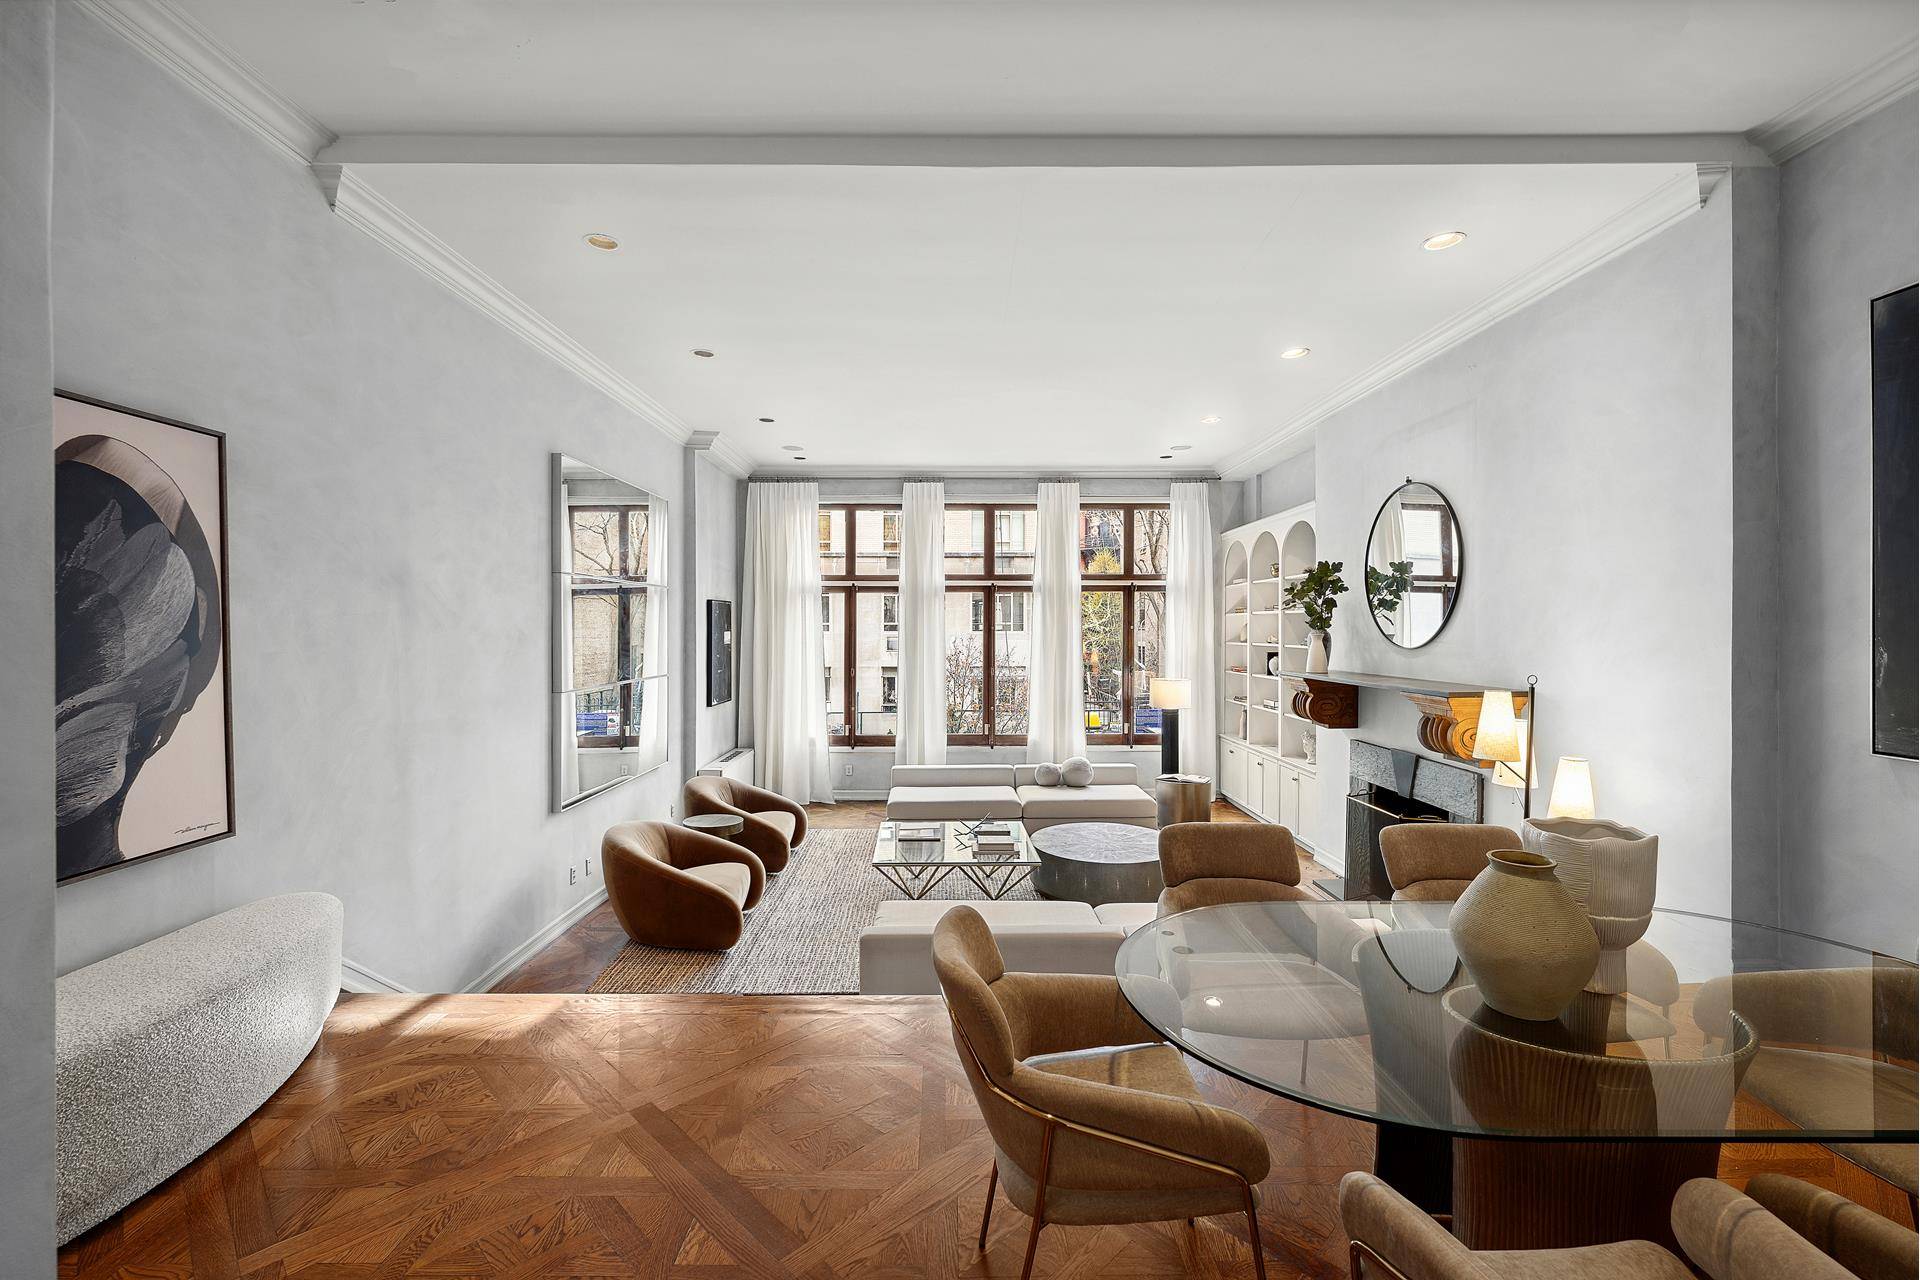 Private amp ; LuxuriousElevate your lifestyle here at 6 E68Experience luxurious living in this chic Upper East Side loft style residence, adjacent to Central Park.